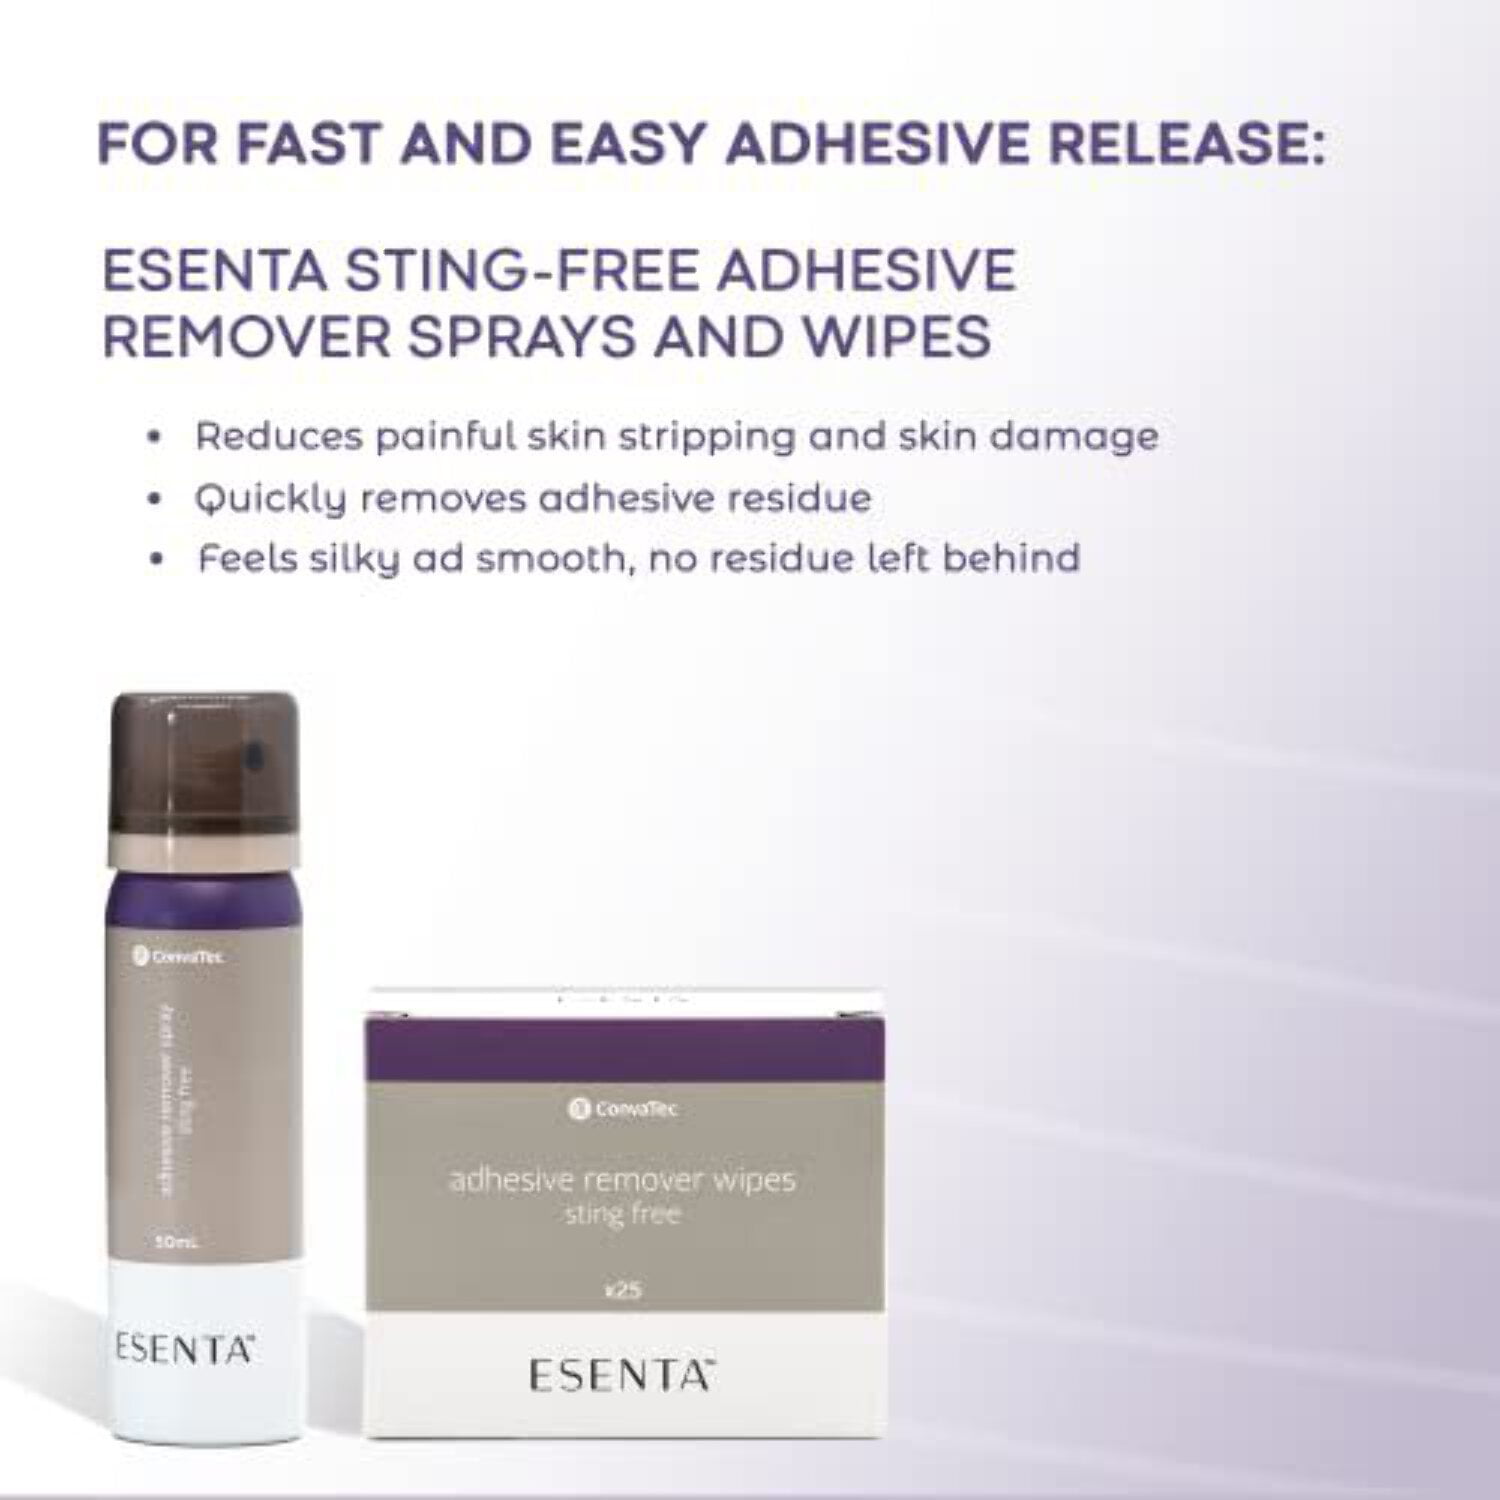 ESENTA Adhesive Remover Wipes for Around Stomas and Wounds, Sting